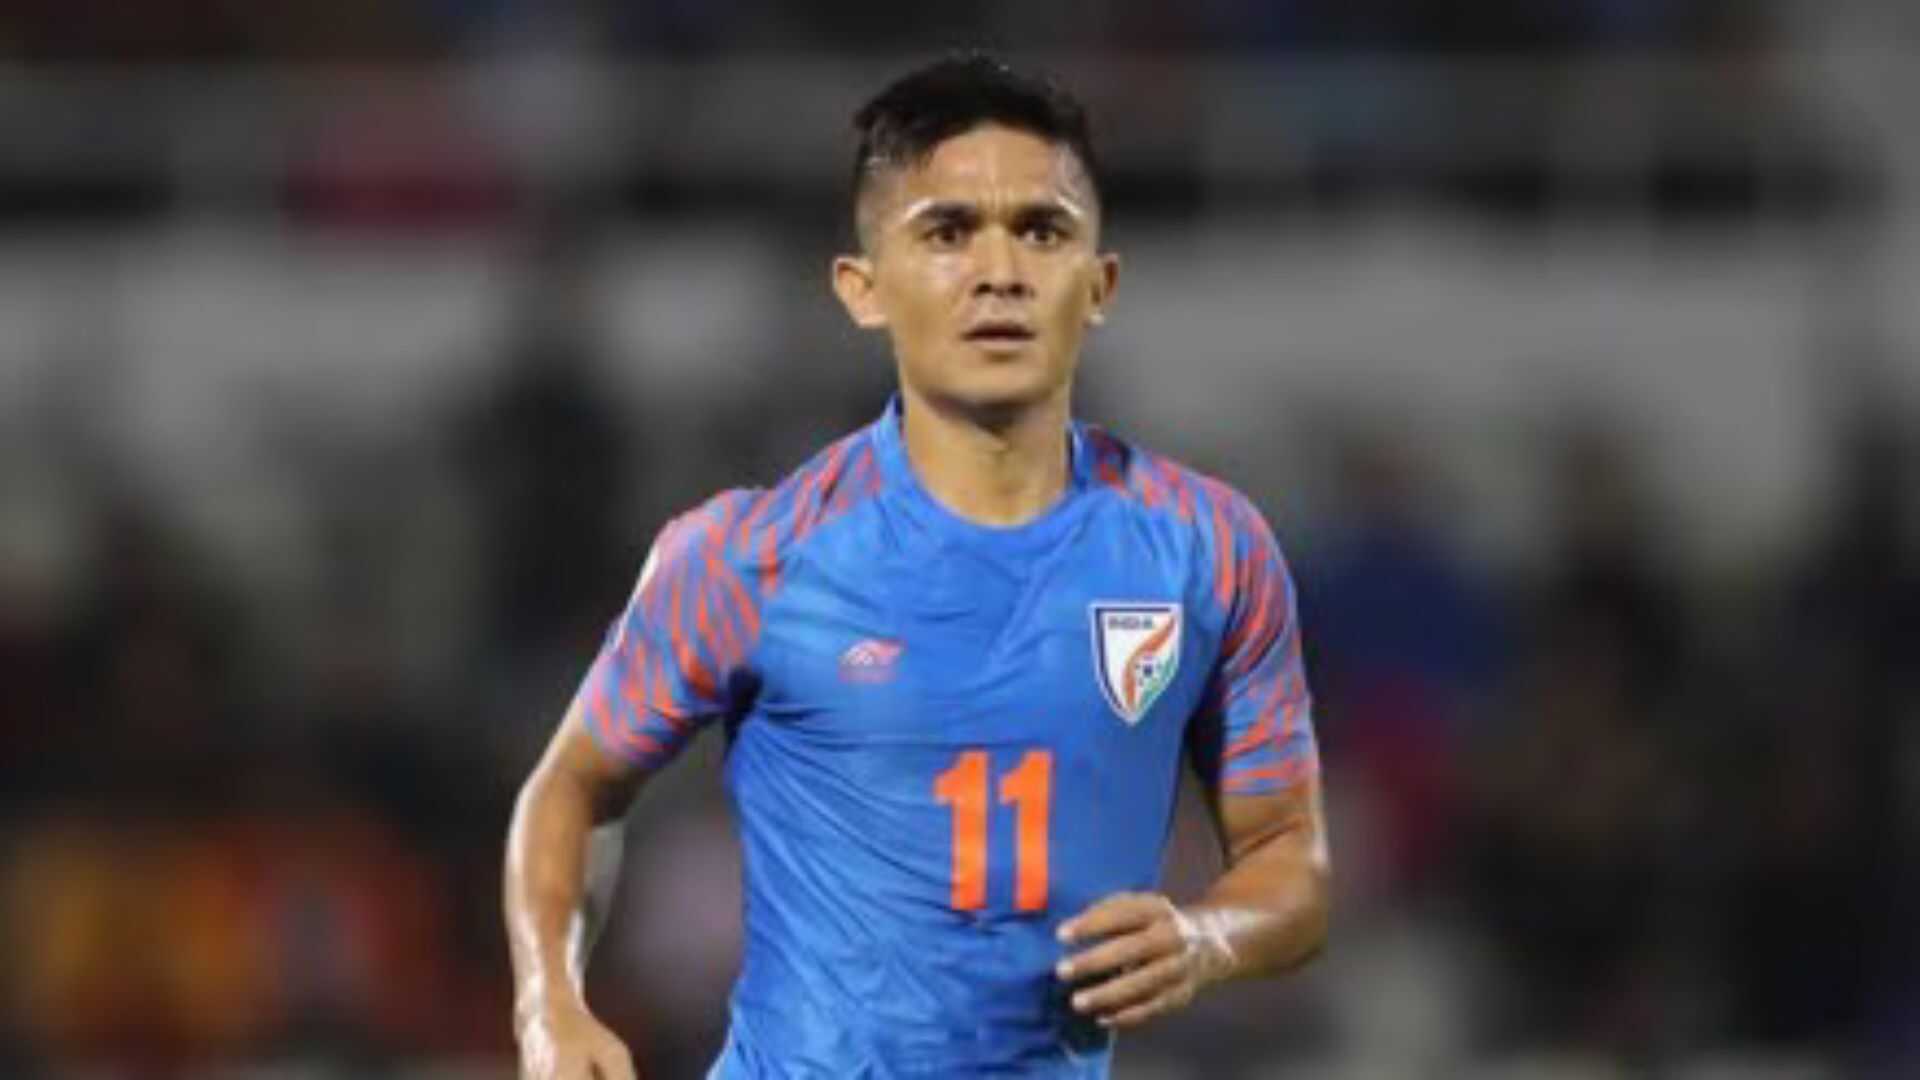 Mamata Banerjee Extends Wishes To Sunil Chhetri Post His Last Match For India